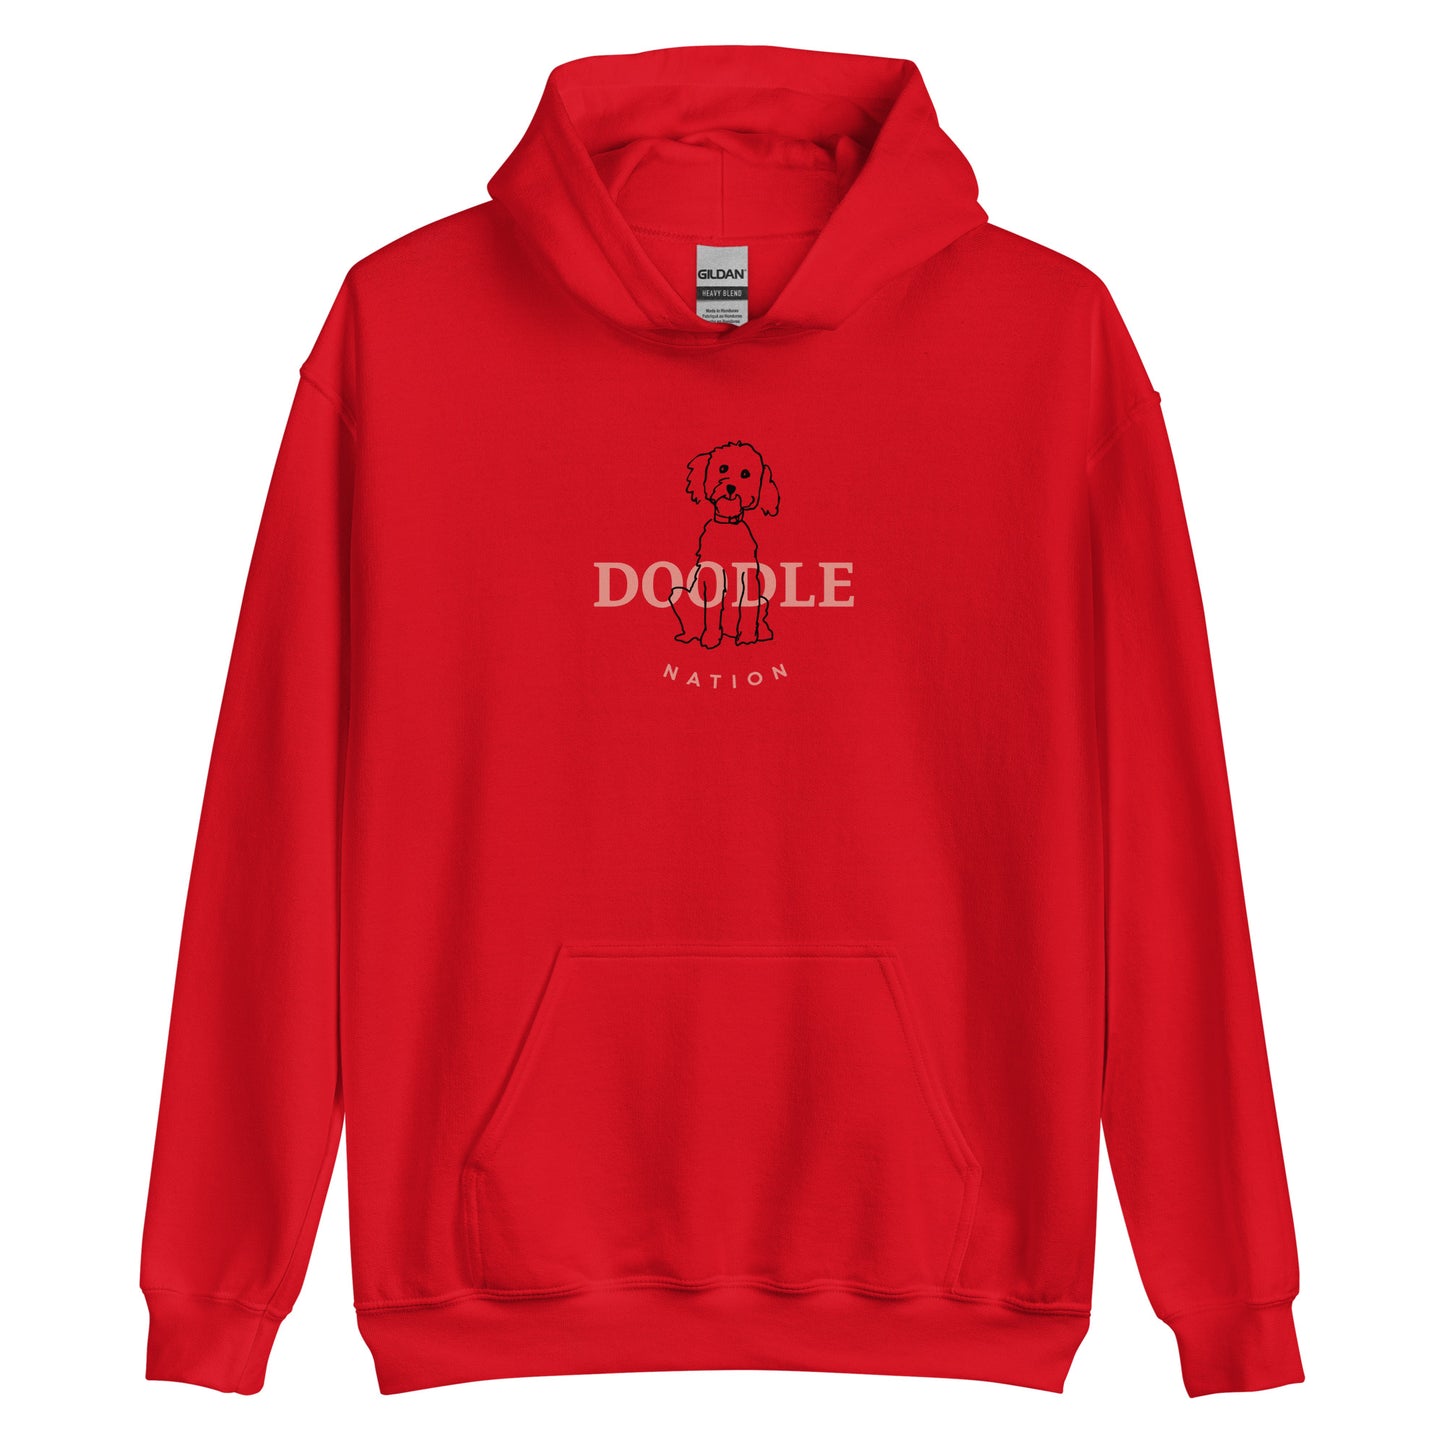 Goldendoodle hoodie with Goldendoodle and words "Doodle Nation" in red color